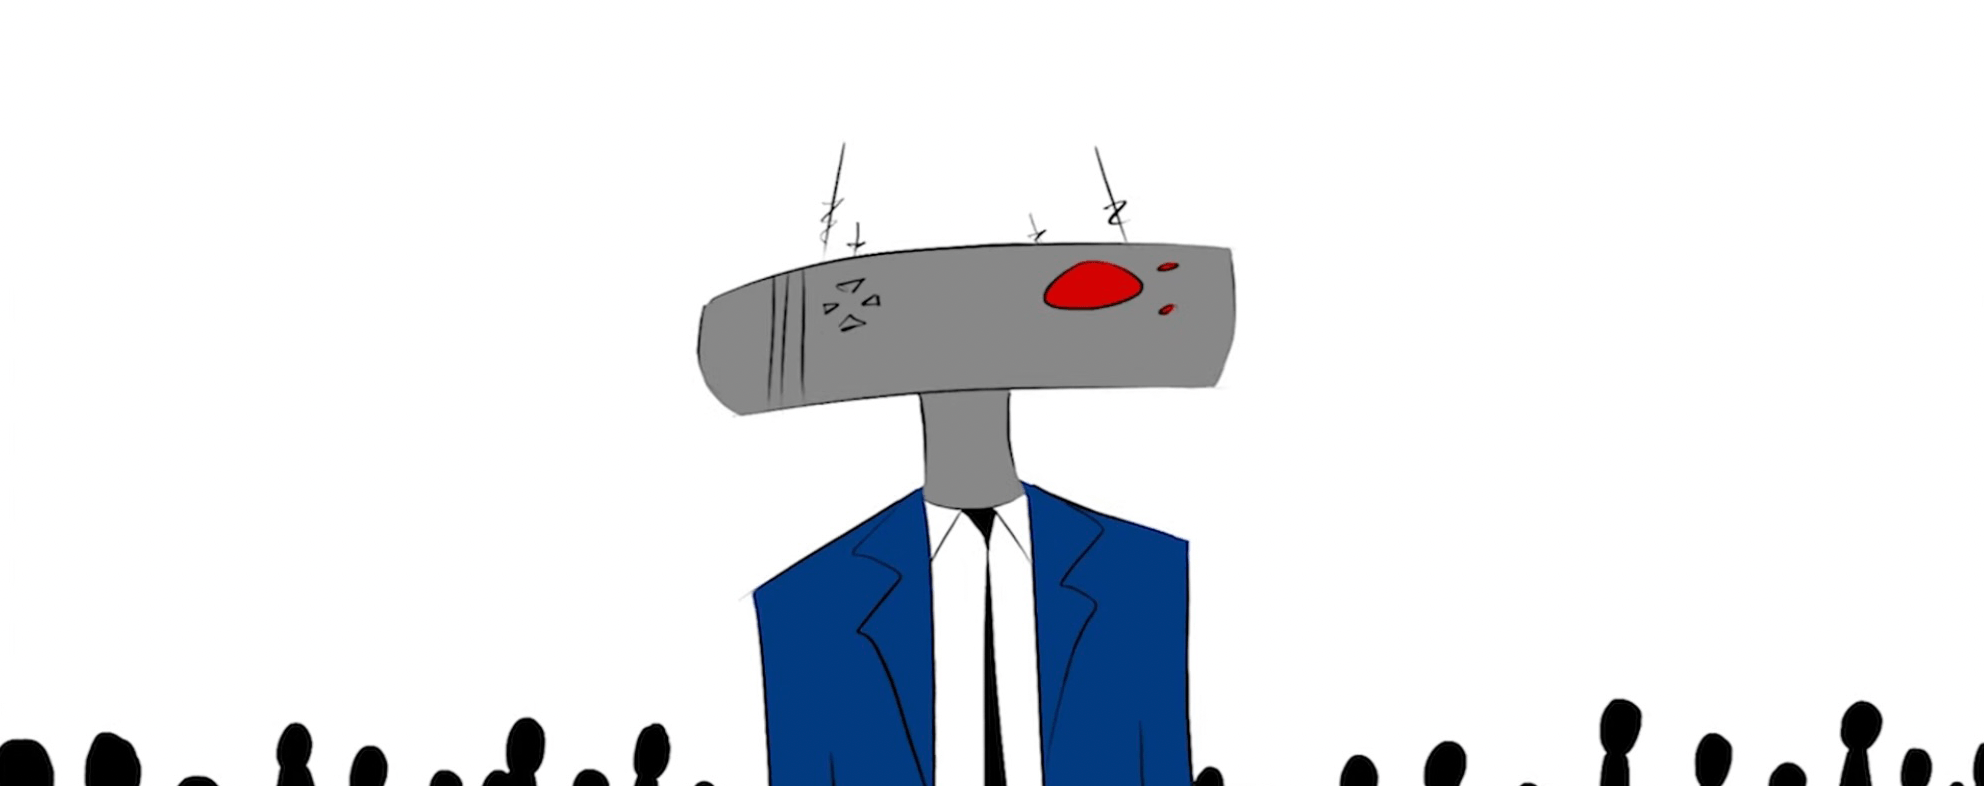 Robot character from Ahmari Ly-Johnson's short film, The Robot Who Loved Art, a grey rectangular head with a red eye, wearing a blue suit with a black tie in front of a crowd of people shaded black over a white background